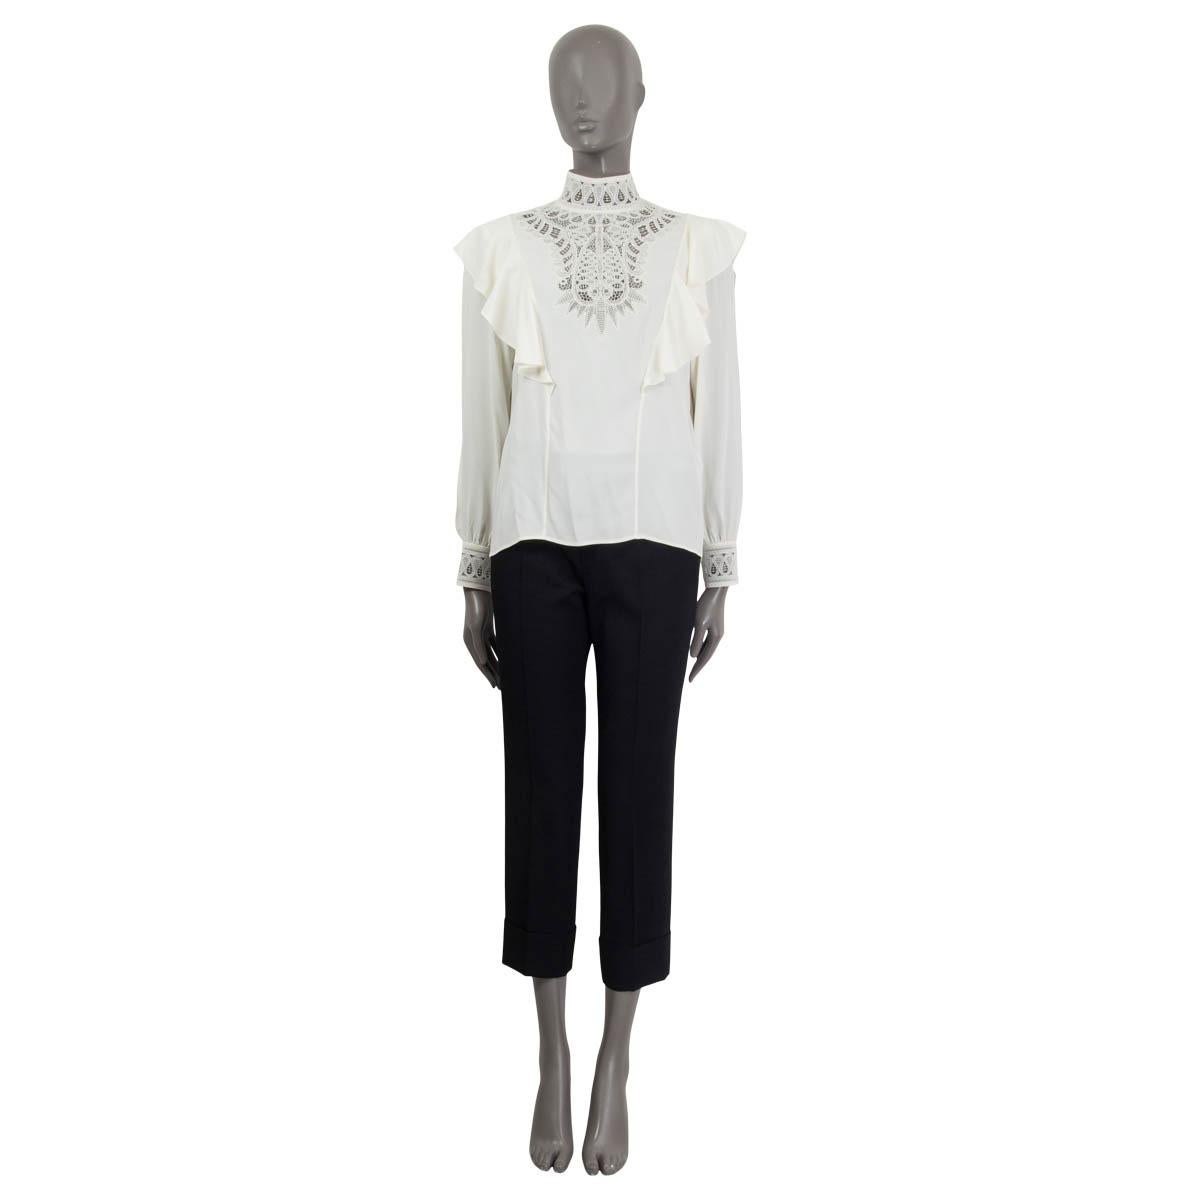 100% authentic Celine long sleeve blouse in off-white acetate (64%) and silk (33%). Comes with crochet lace on the neck, the front and the buttoned cuffs. Embroidery with ruffles on the front and the back. Opens with a hook and a concealed zipper on